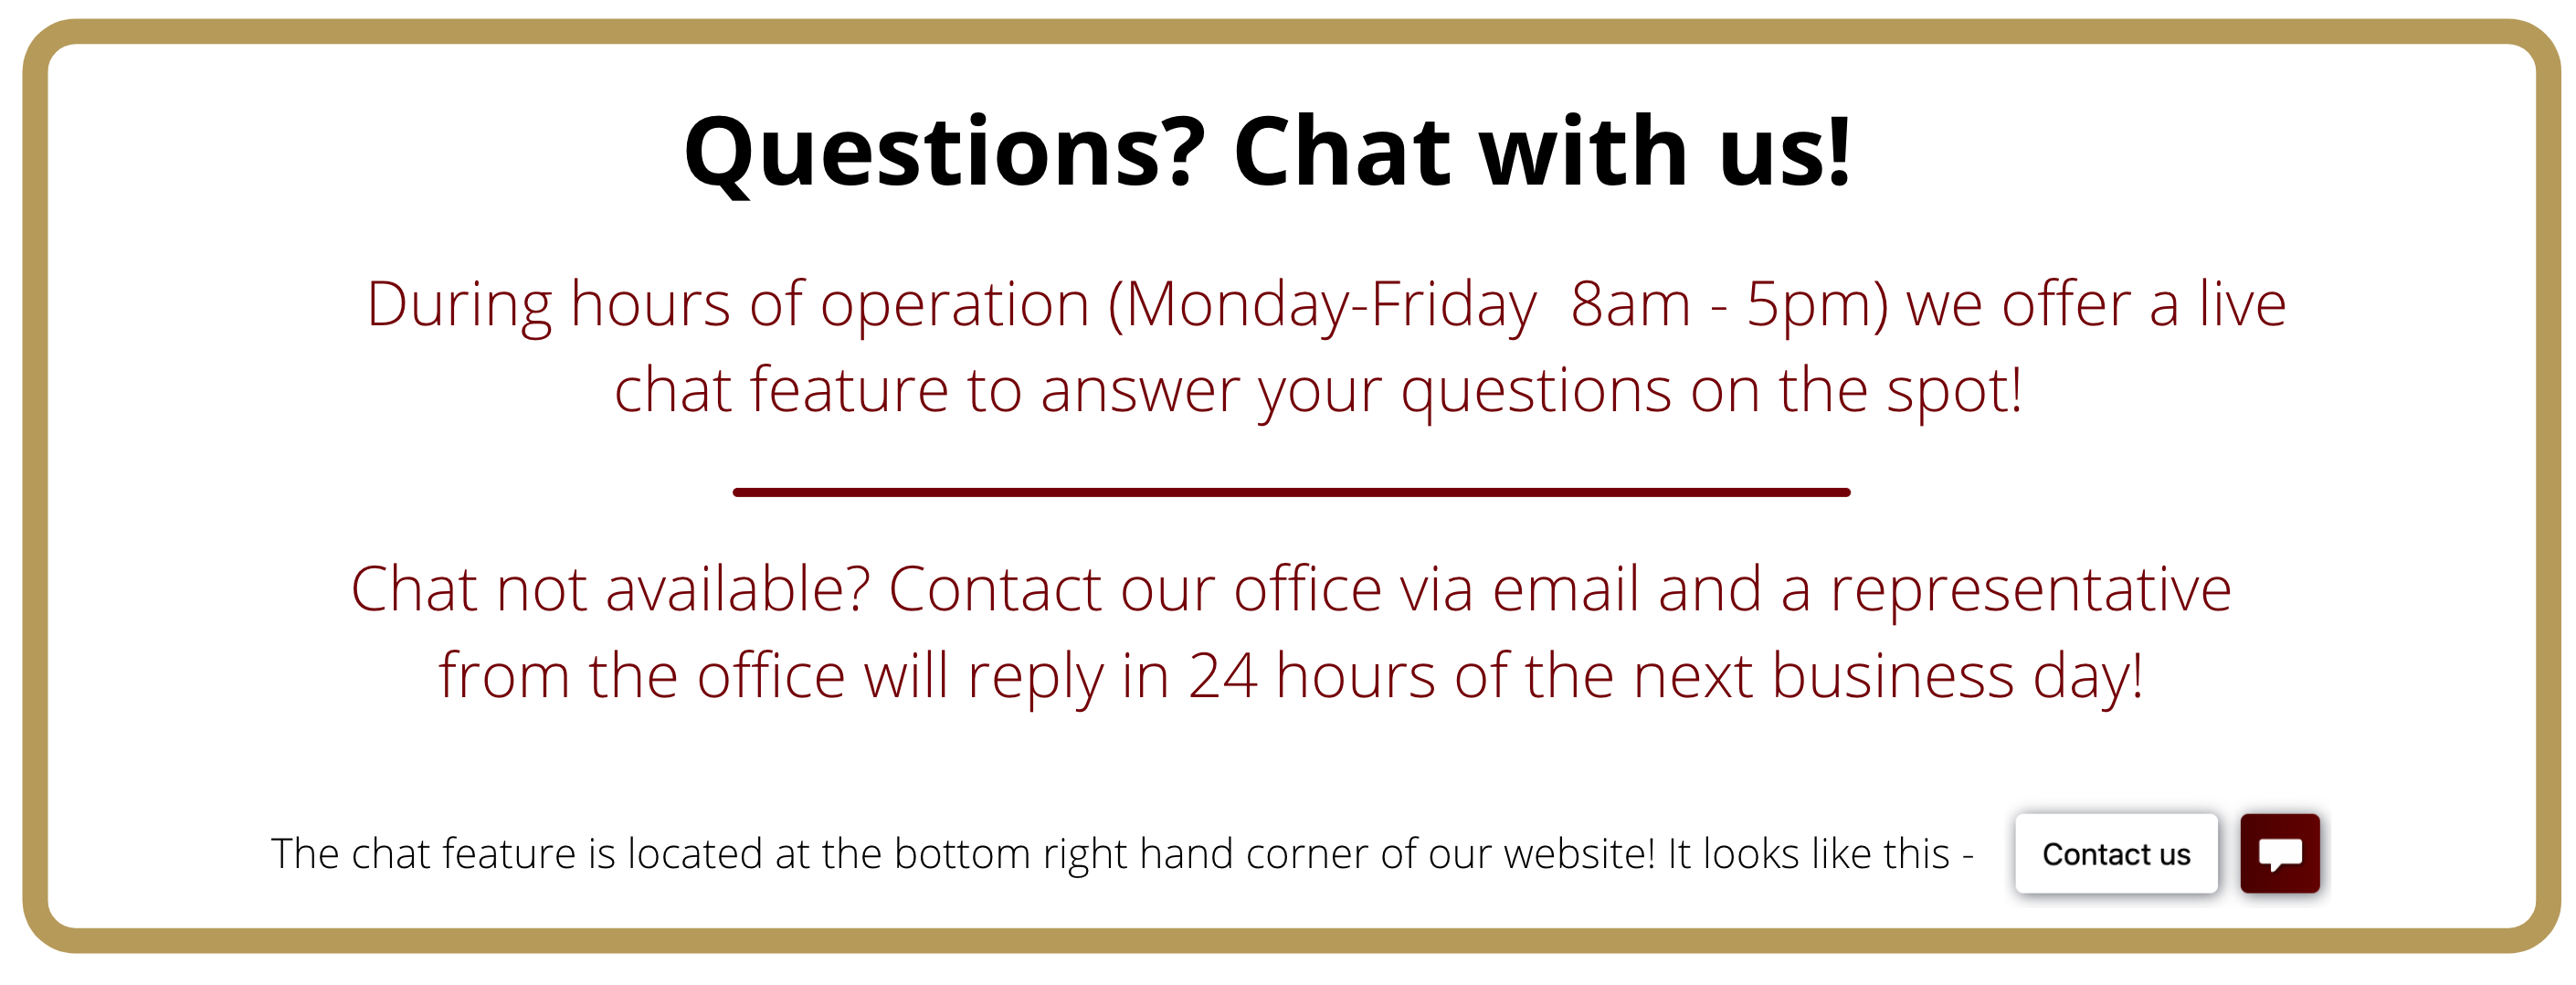 Questions? Chat with us! we have a life chat feature available at the bottom right of our website. Chat not available? Dont worry, a representative will respond to you in 24 hours of the next business day.